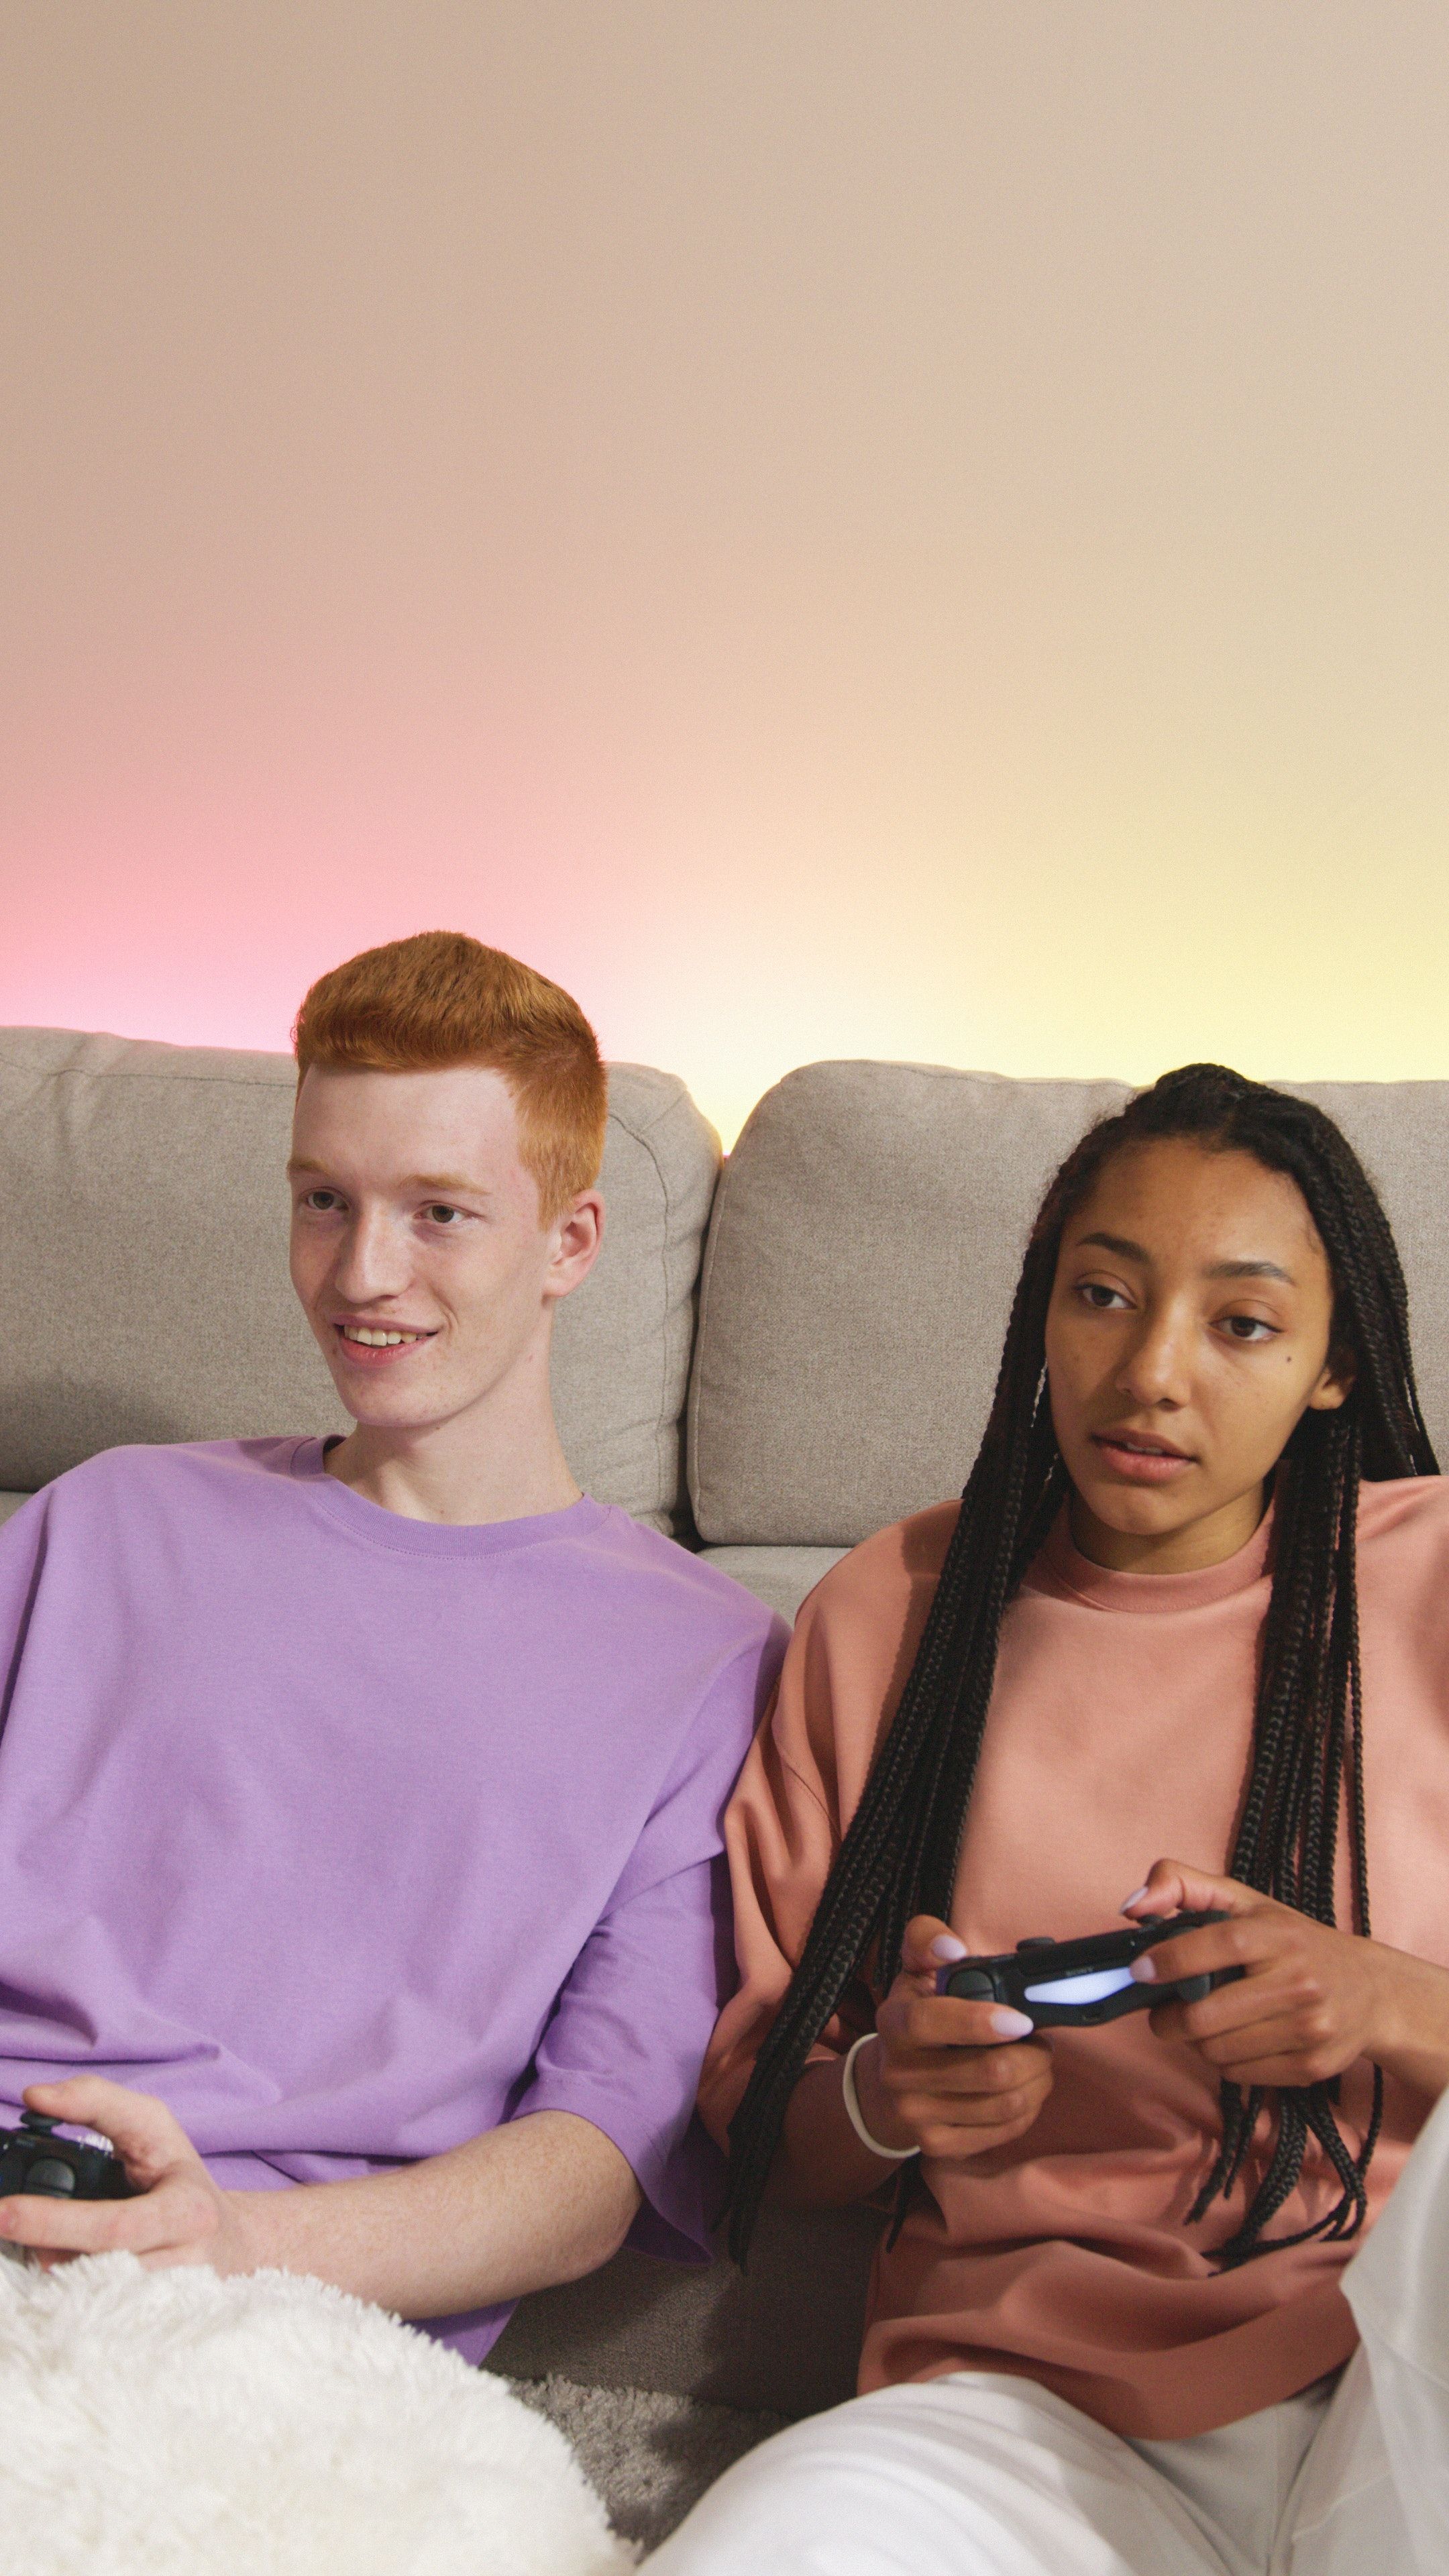 Two teenagers playing video games